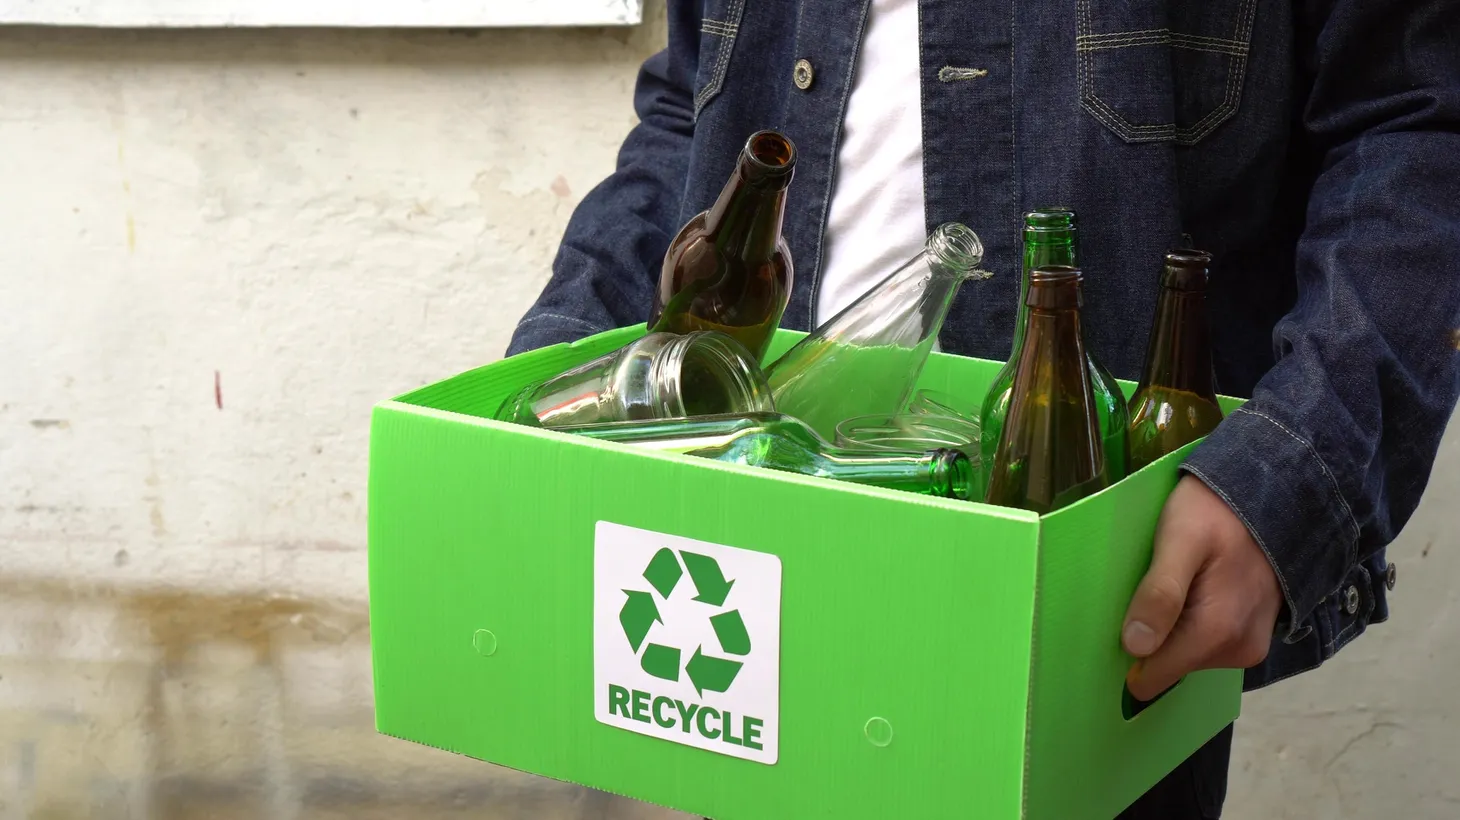 Recycling fraud is costing tens of millions of dollars a year, according to Consumer Watchdog .